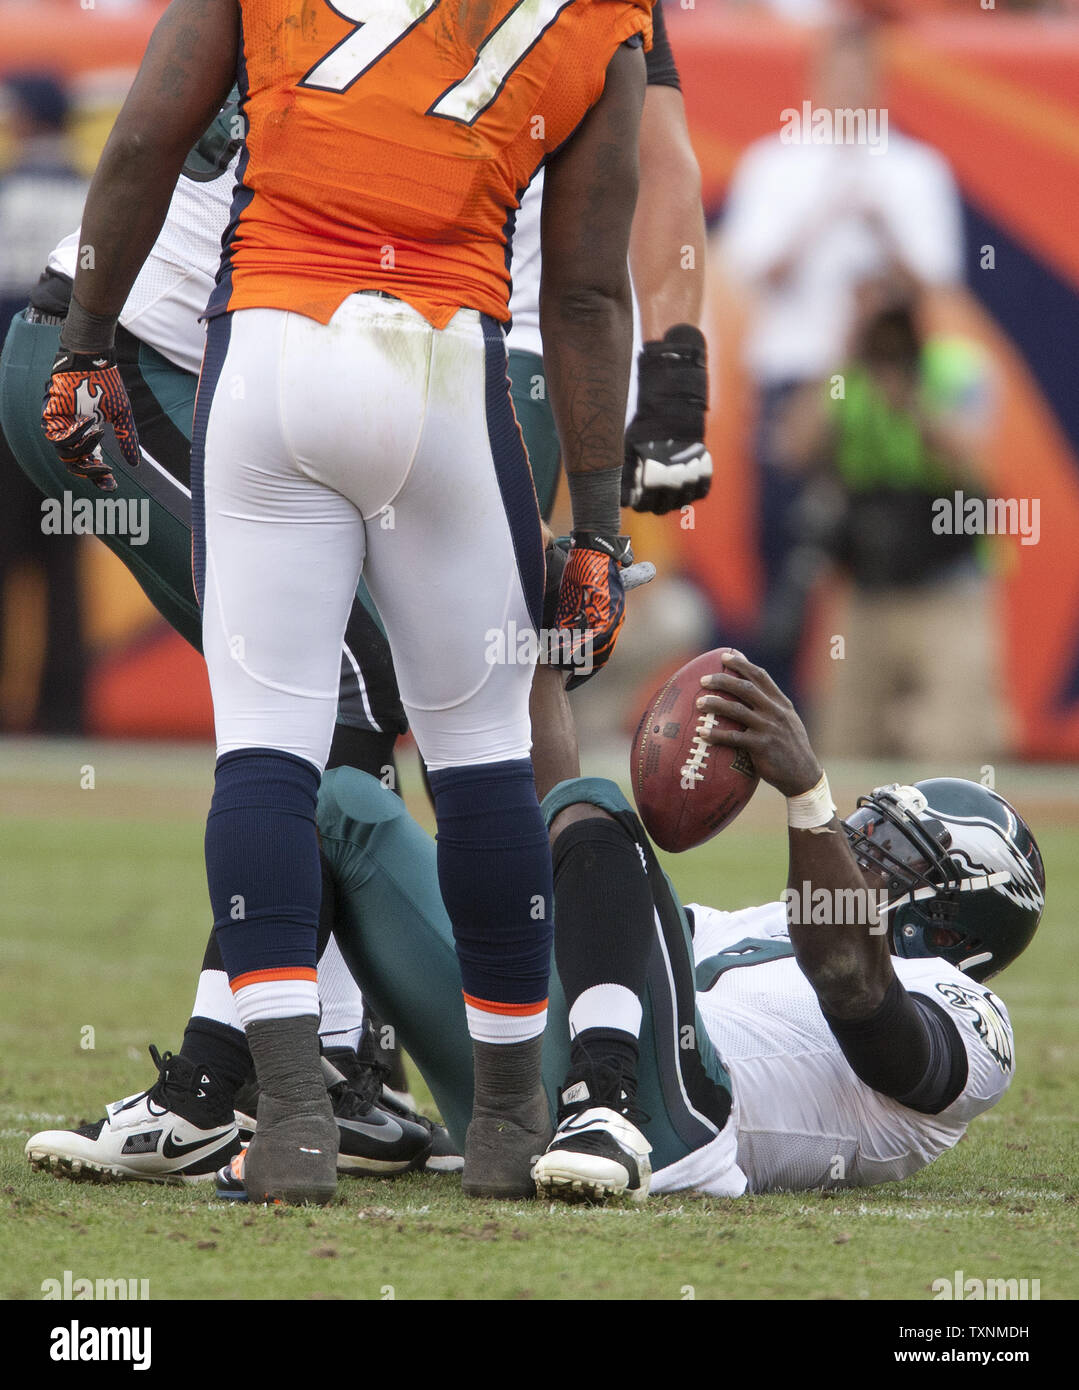 Denver Broncos Robert Ayers stands over sacked Philadelphia Eagles quarterback Michael Vick at the end of the third quarter at Sports Authority Field at Mile High in Denver on September 29, 2013.  Denver (4-0) beat Philadelphia (1-3) 52-20 to remain undefeated.     UPI/Gary C. Caskey Stock Photo